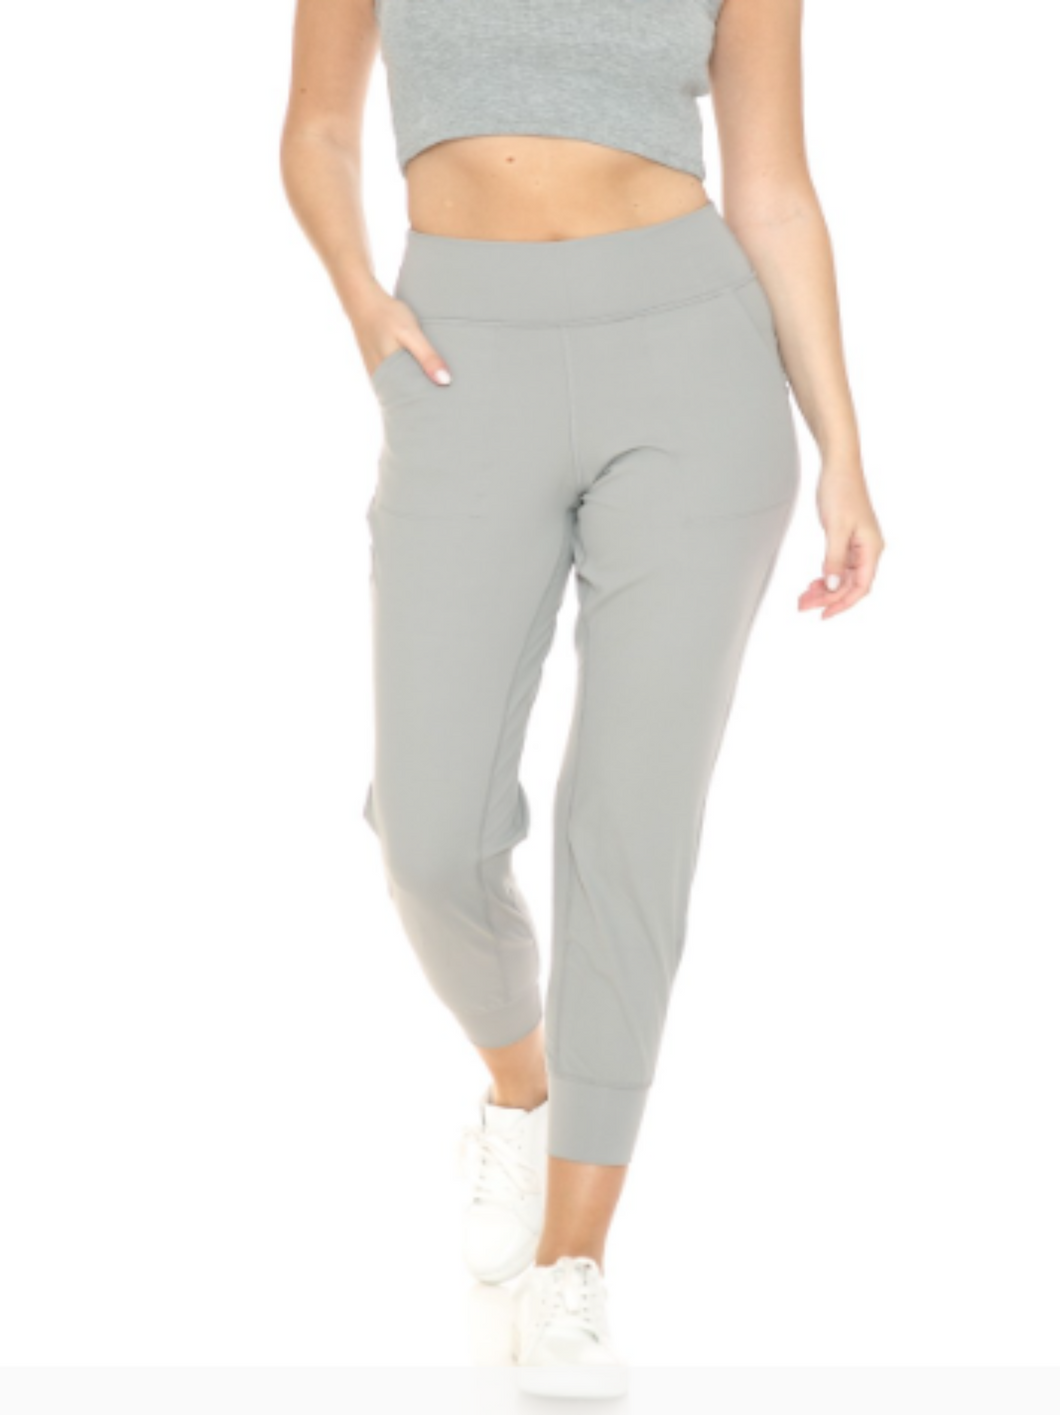 Gift Me Active Joggers: Gray